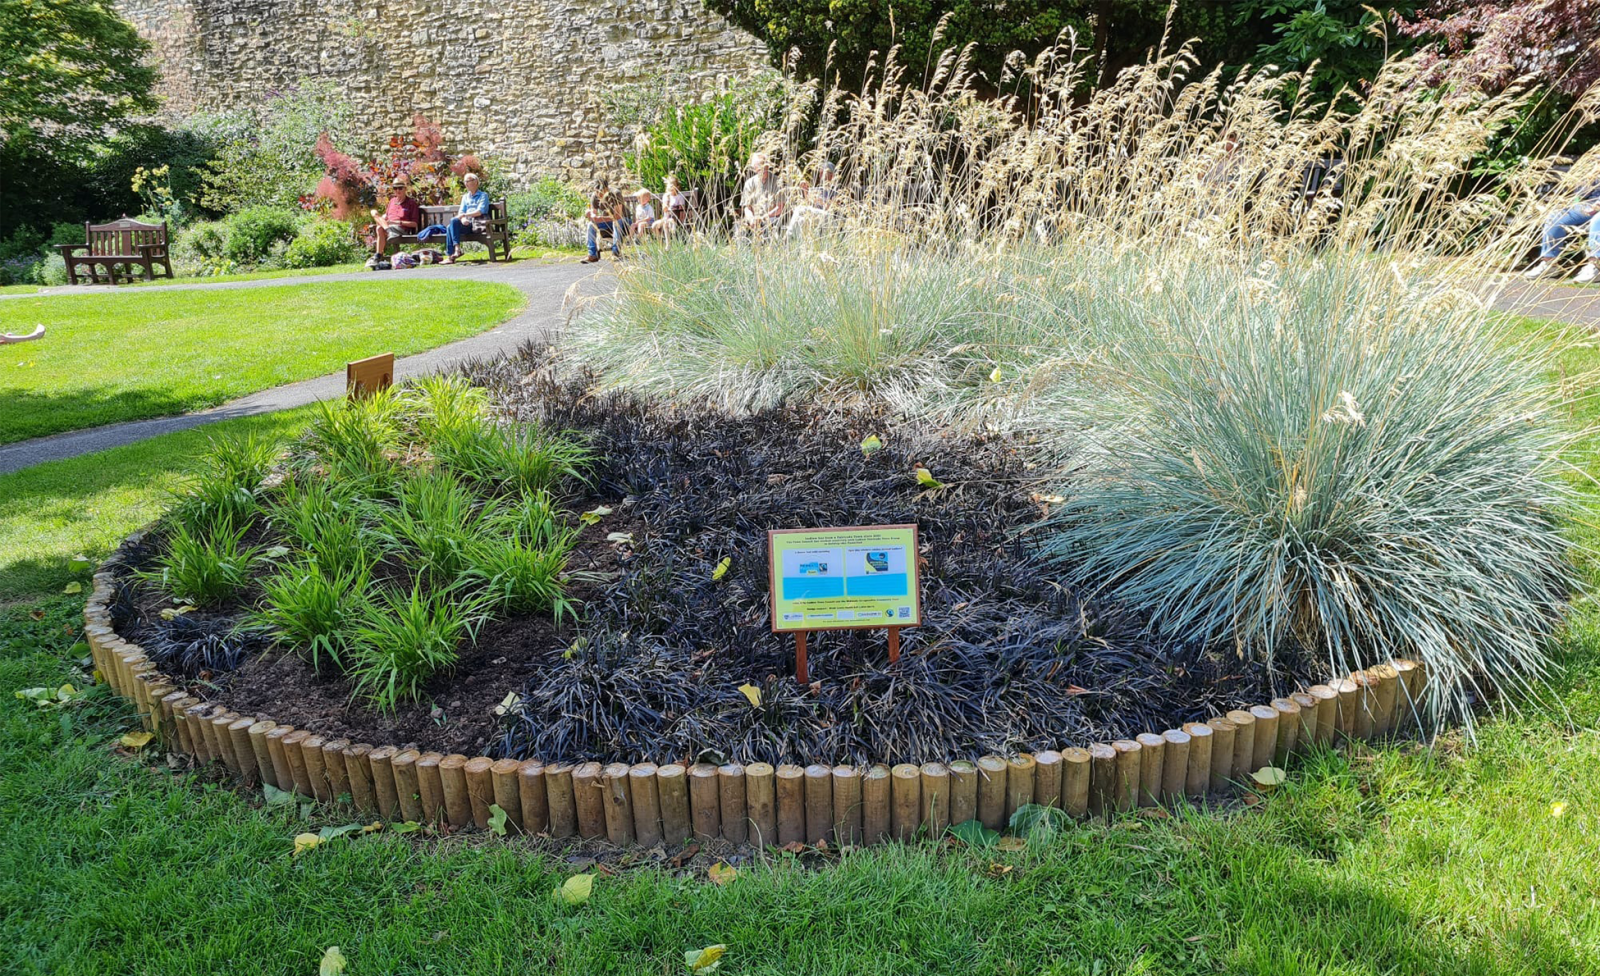 Refurbishment of the Fairtrade Flowerbed and re-certification as a Fairtrade Town